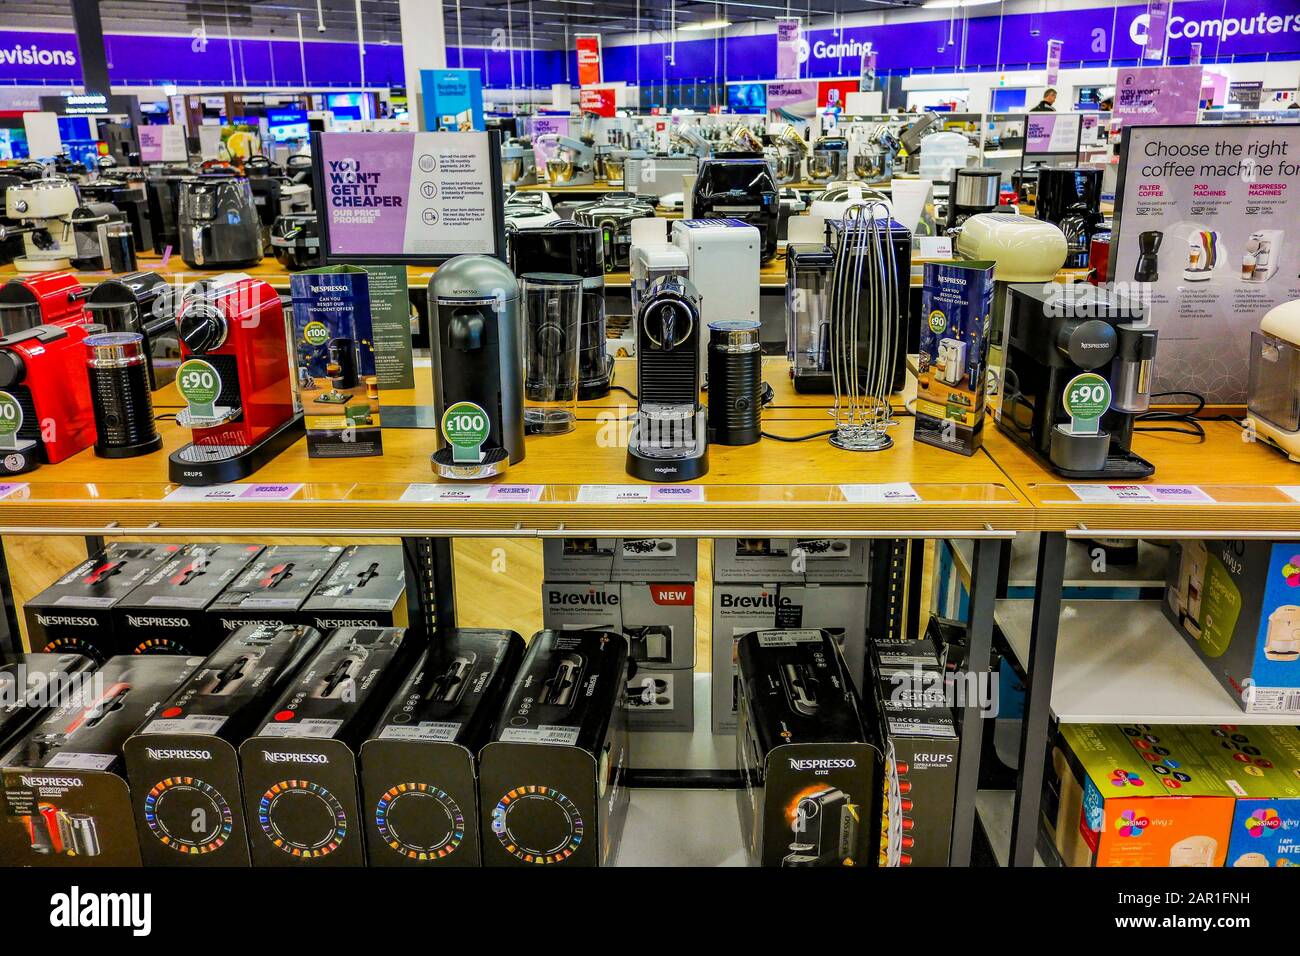 inside electrical retailer store Stock Photo